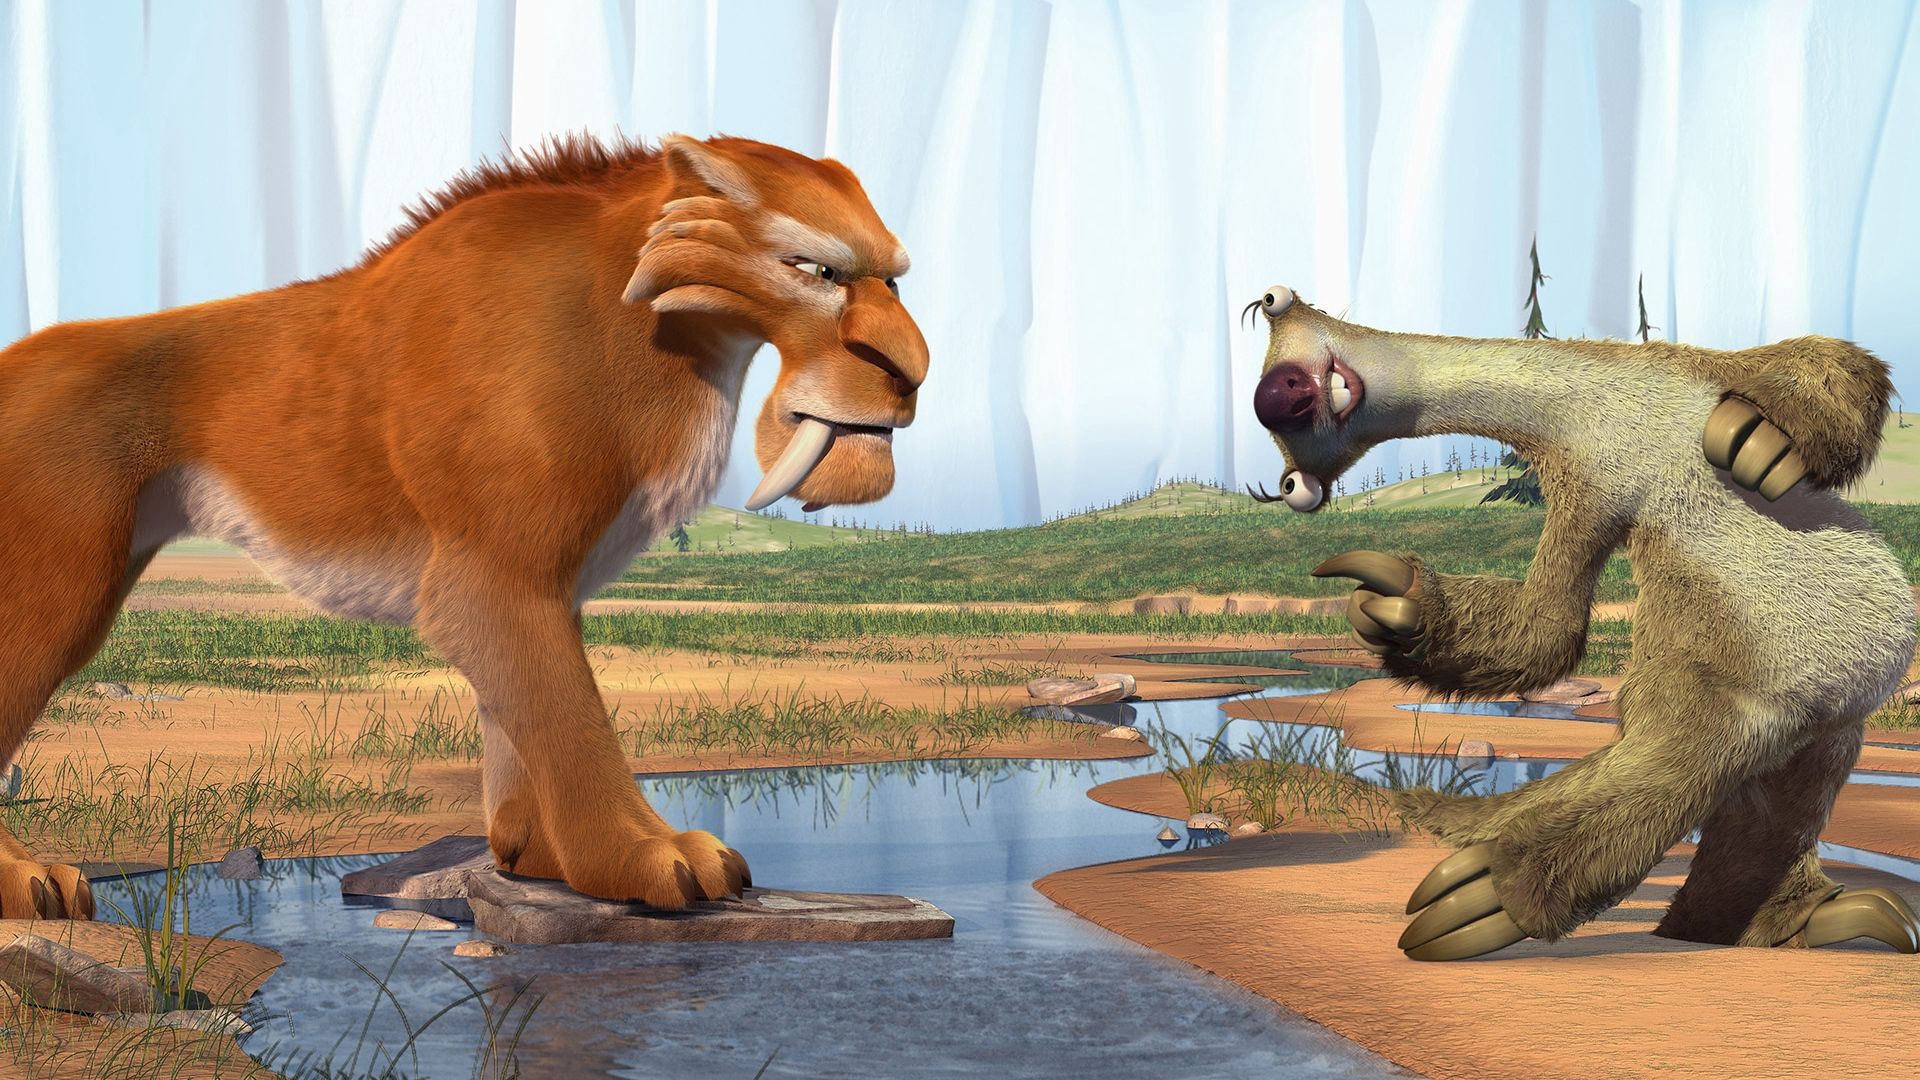 ice age, diego, sid, miscellanea, miscellaneous, sloth, glacial period, saber toothed tiger